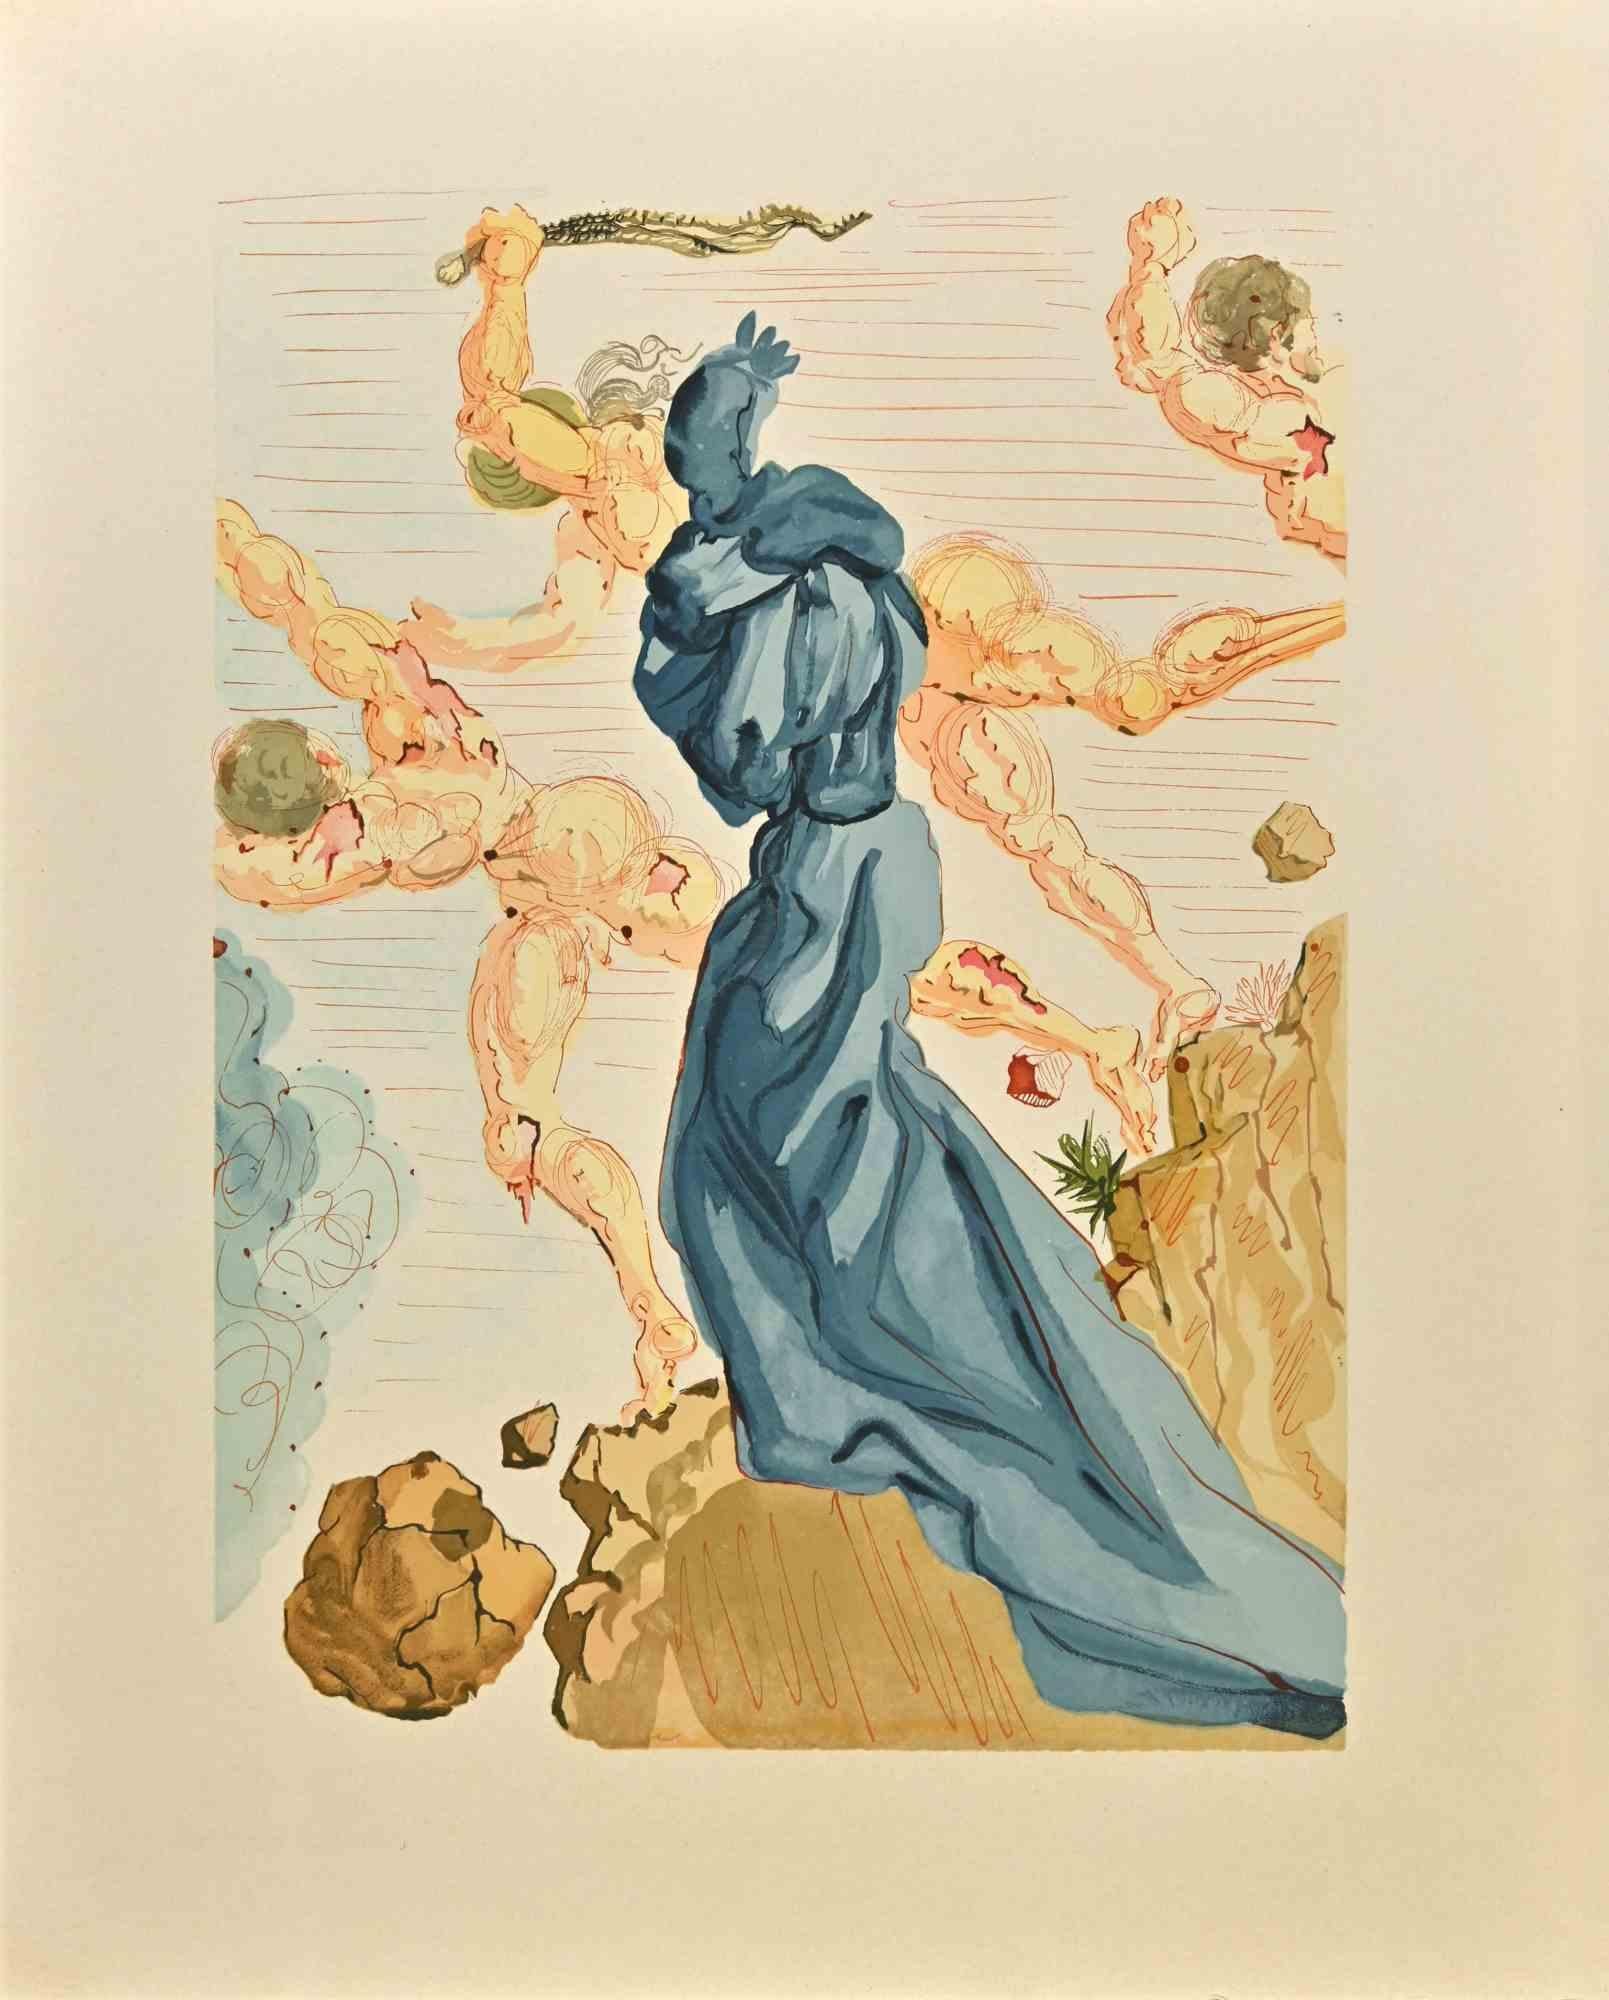 Salvador Dalí Figurative Print - Hard Margins from The Series "The Divine Comedy" - Woodcut Print - 1963